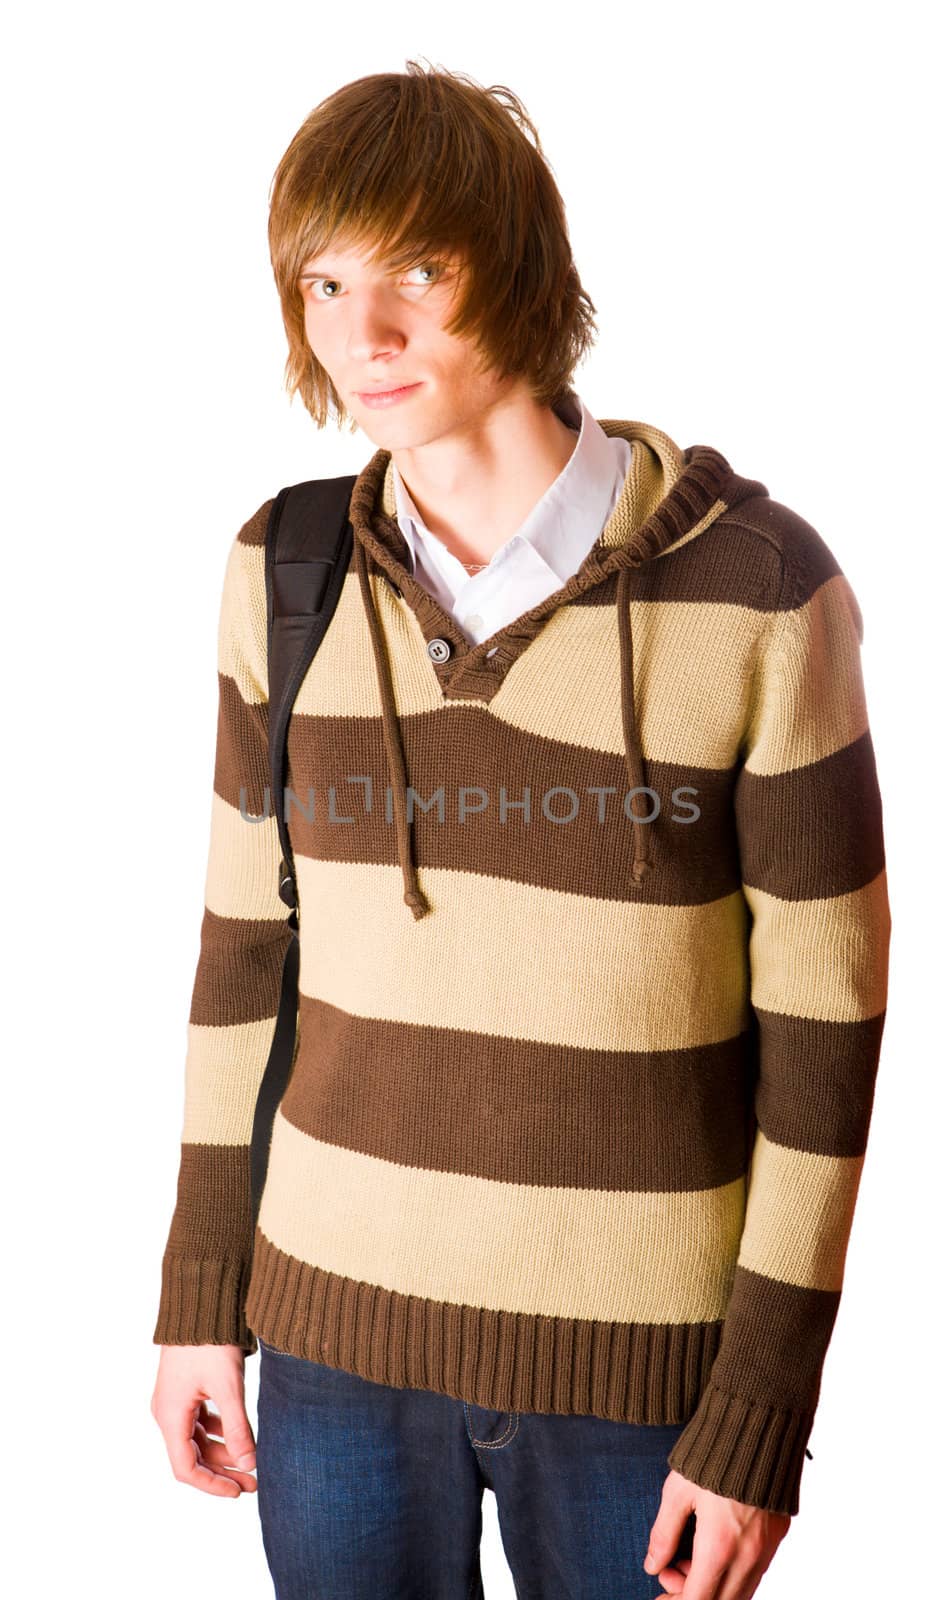 Young man wearing striped sweater and backpack isolated on white